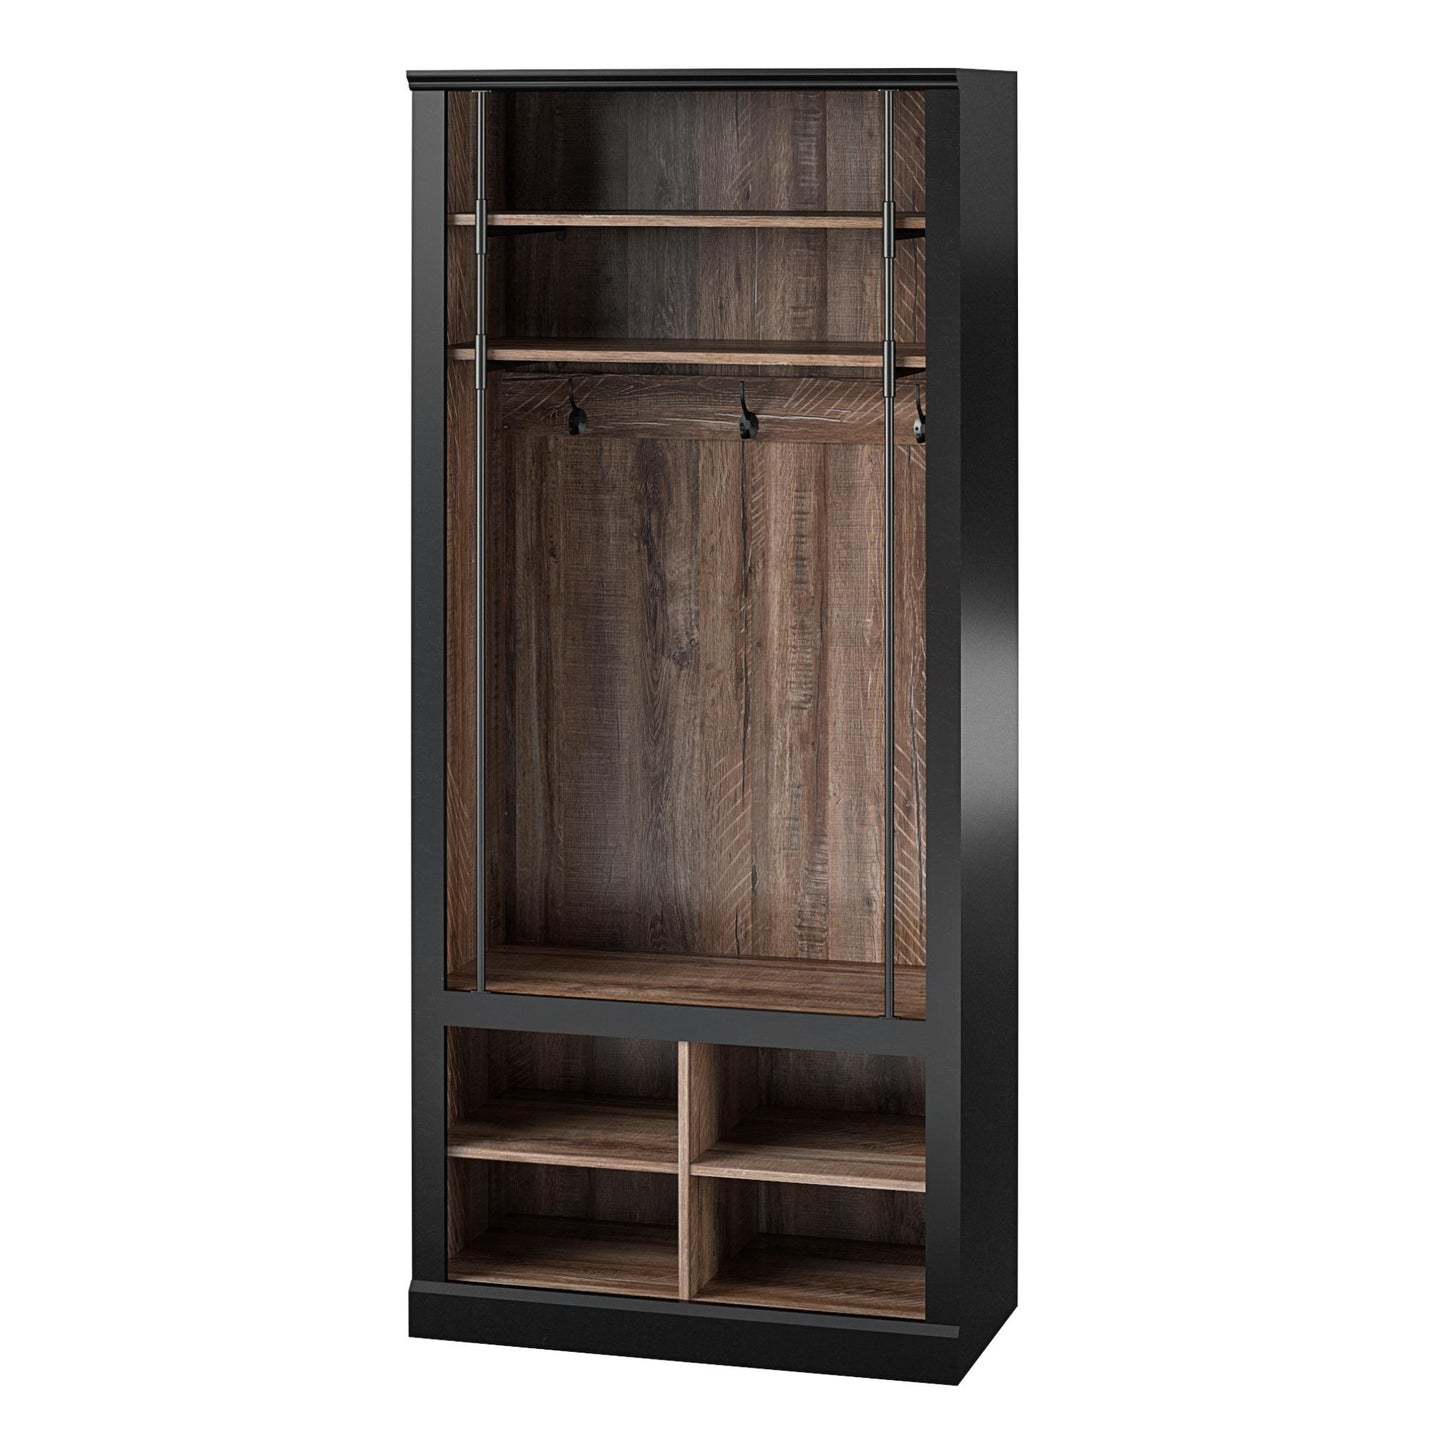 Hoffmann Entryway Hall Tree with Bench and Storage Cubbies - Black